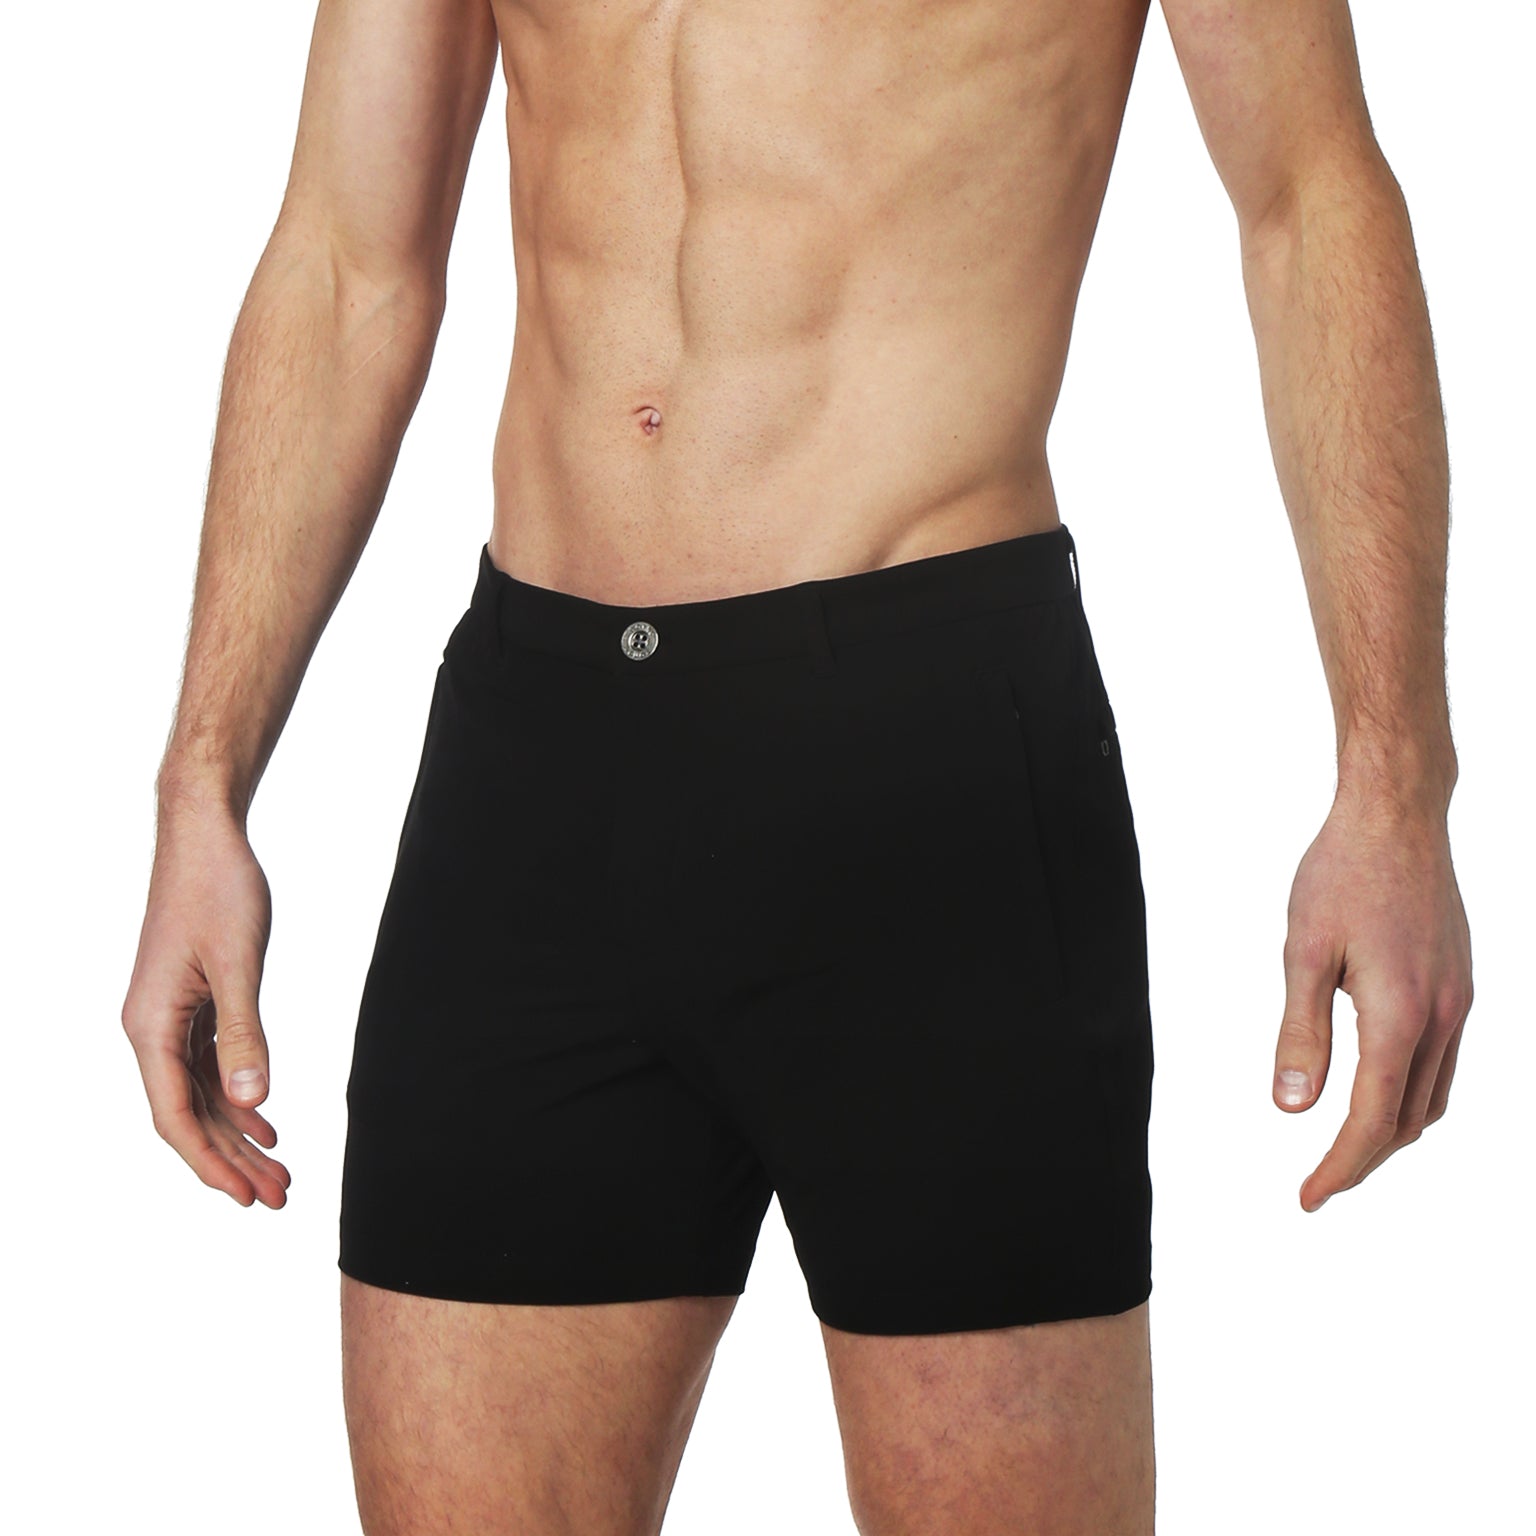 ACTIONWEAR- Black Solid Action Stretch Holler Shorts